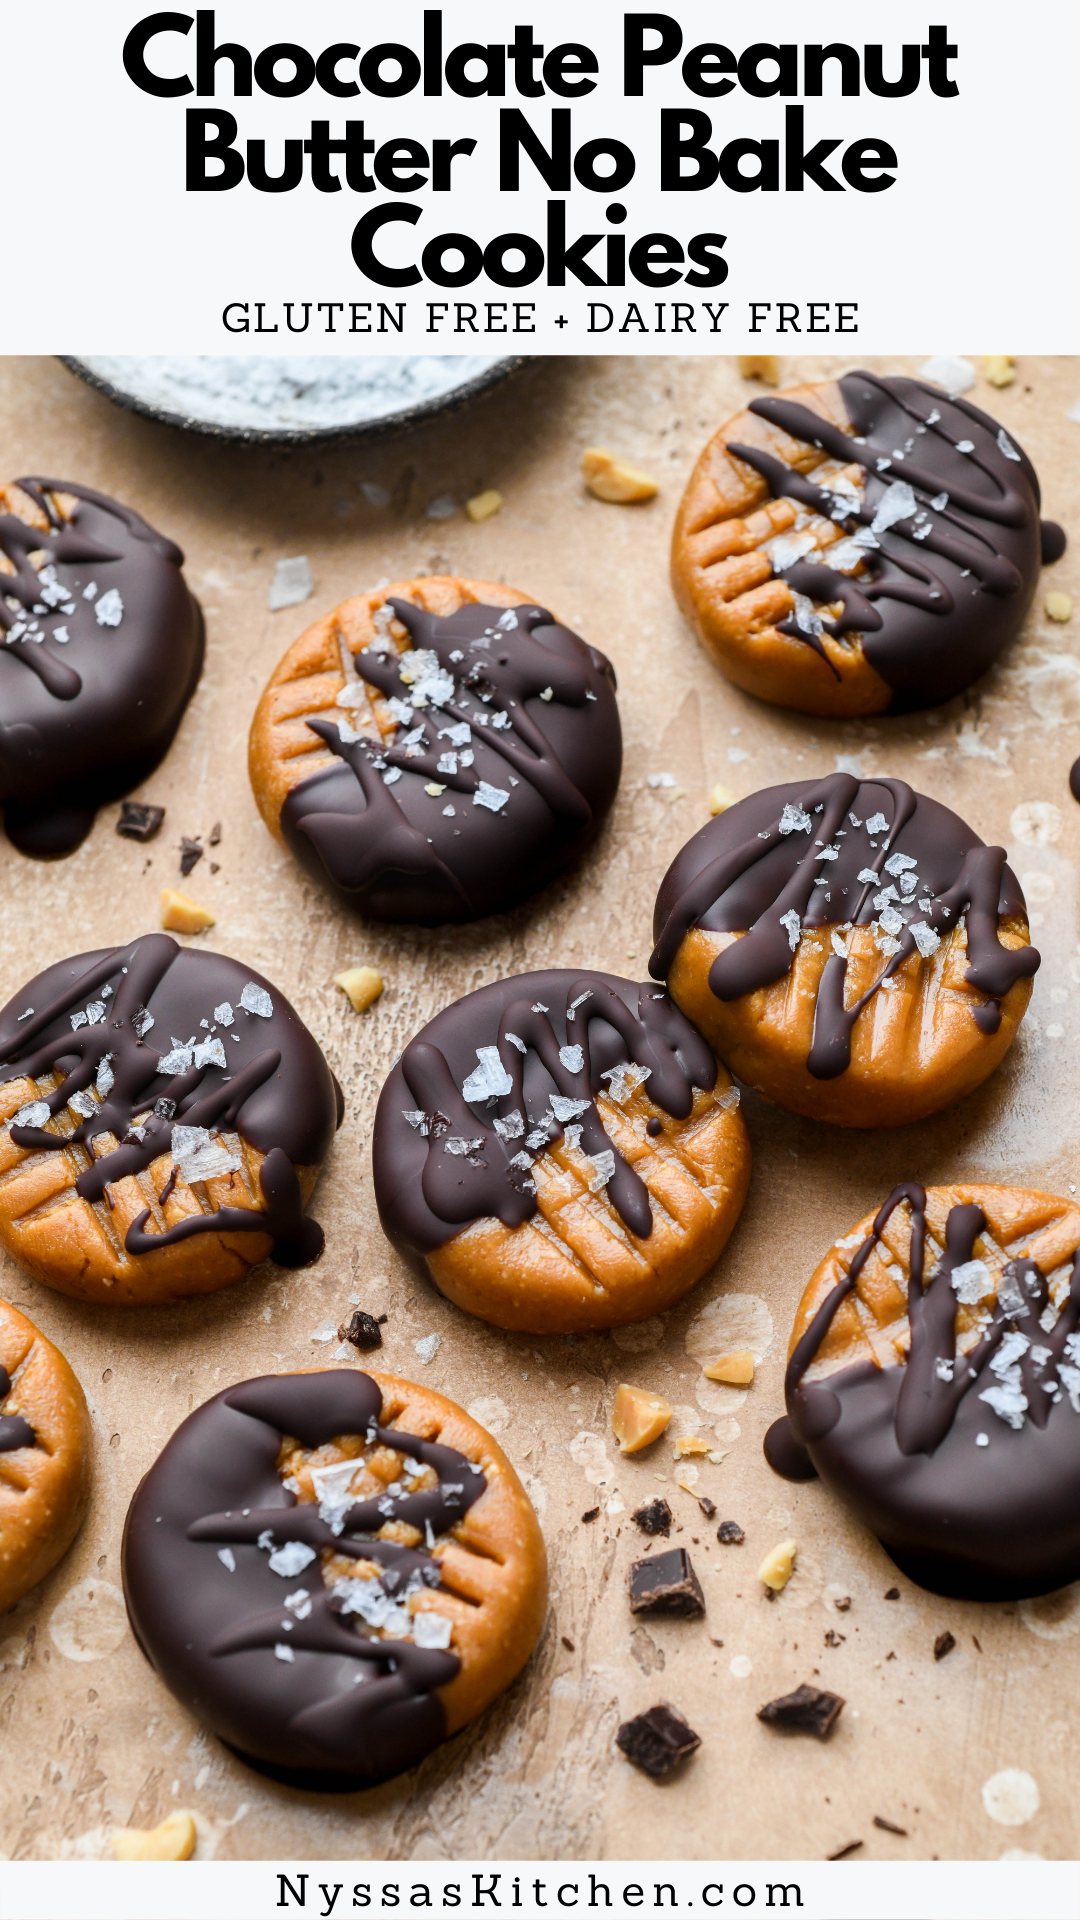 These no bake chocolate peanut butter cookies are made with just a handful of healthy ingredients. No baking required, very little clean up, and the most amazing peanut butter cookies that taste almost like a chocolate peanut butter cup when dipped in chocolate. Vegan, gluten free, refined sugar free, and paleo option.